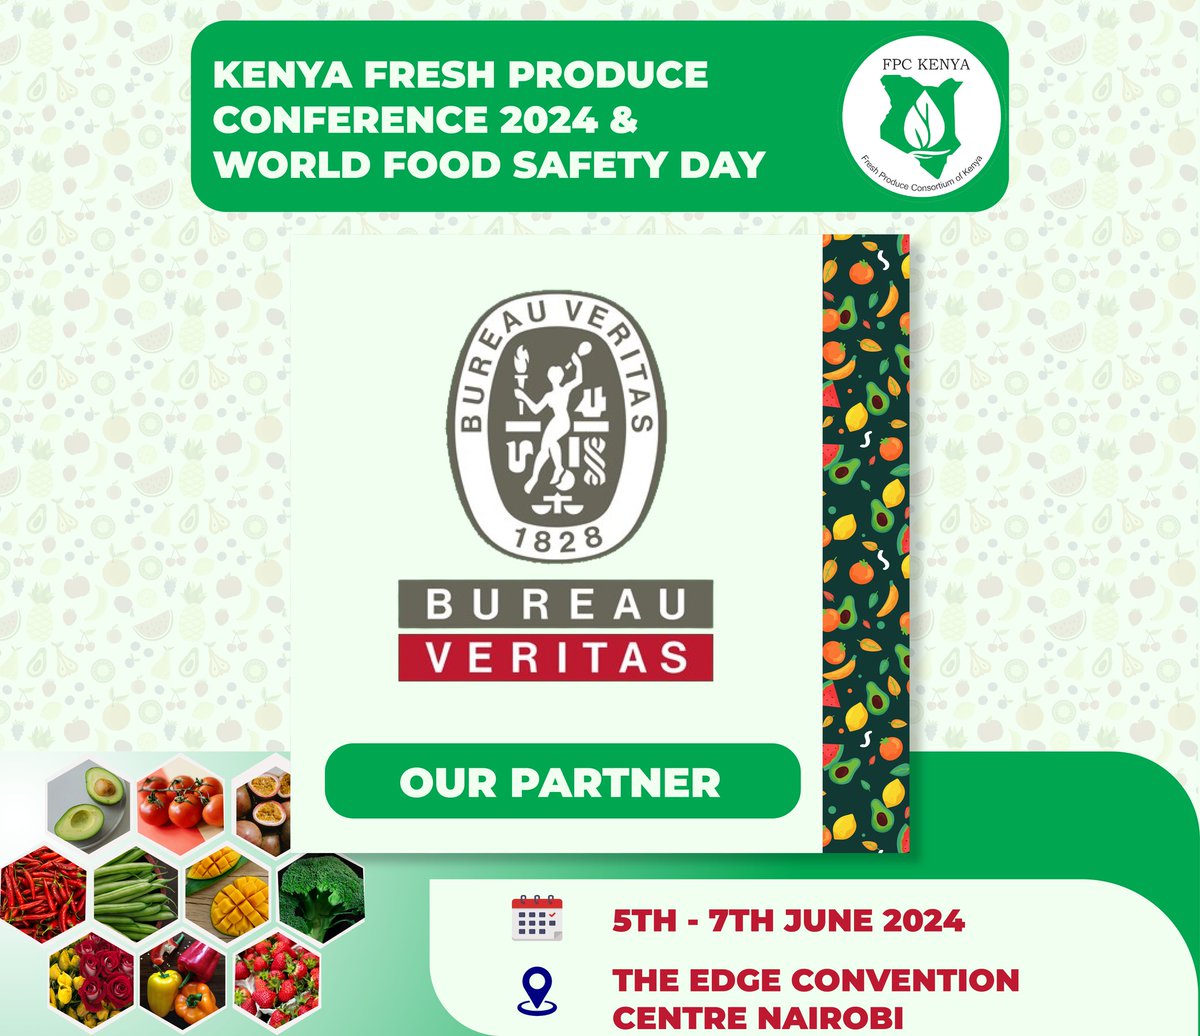 We are honored to welcome @bureauveritas on board as our esteemed Partner for the upcoming Kenya Fresh Produce Conference 2024 & World Food Safety Day.